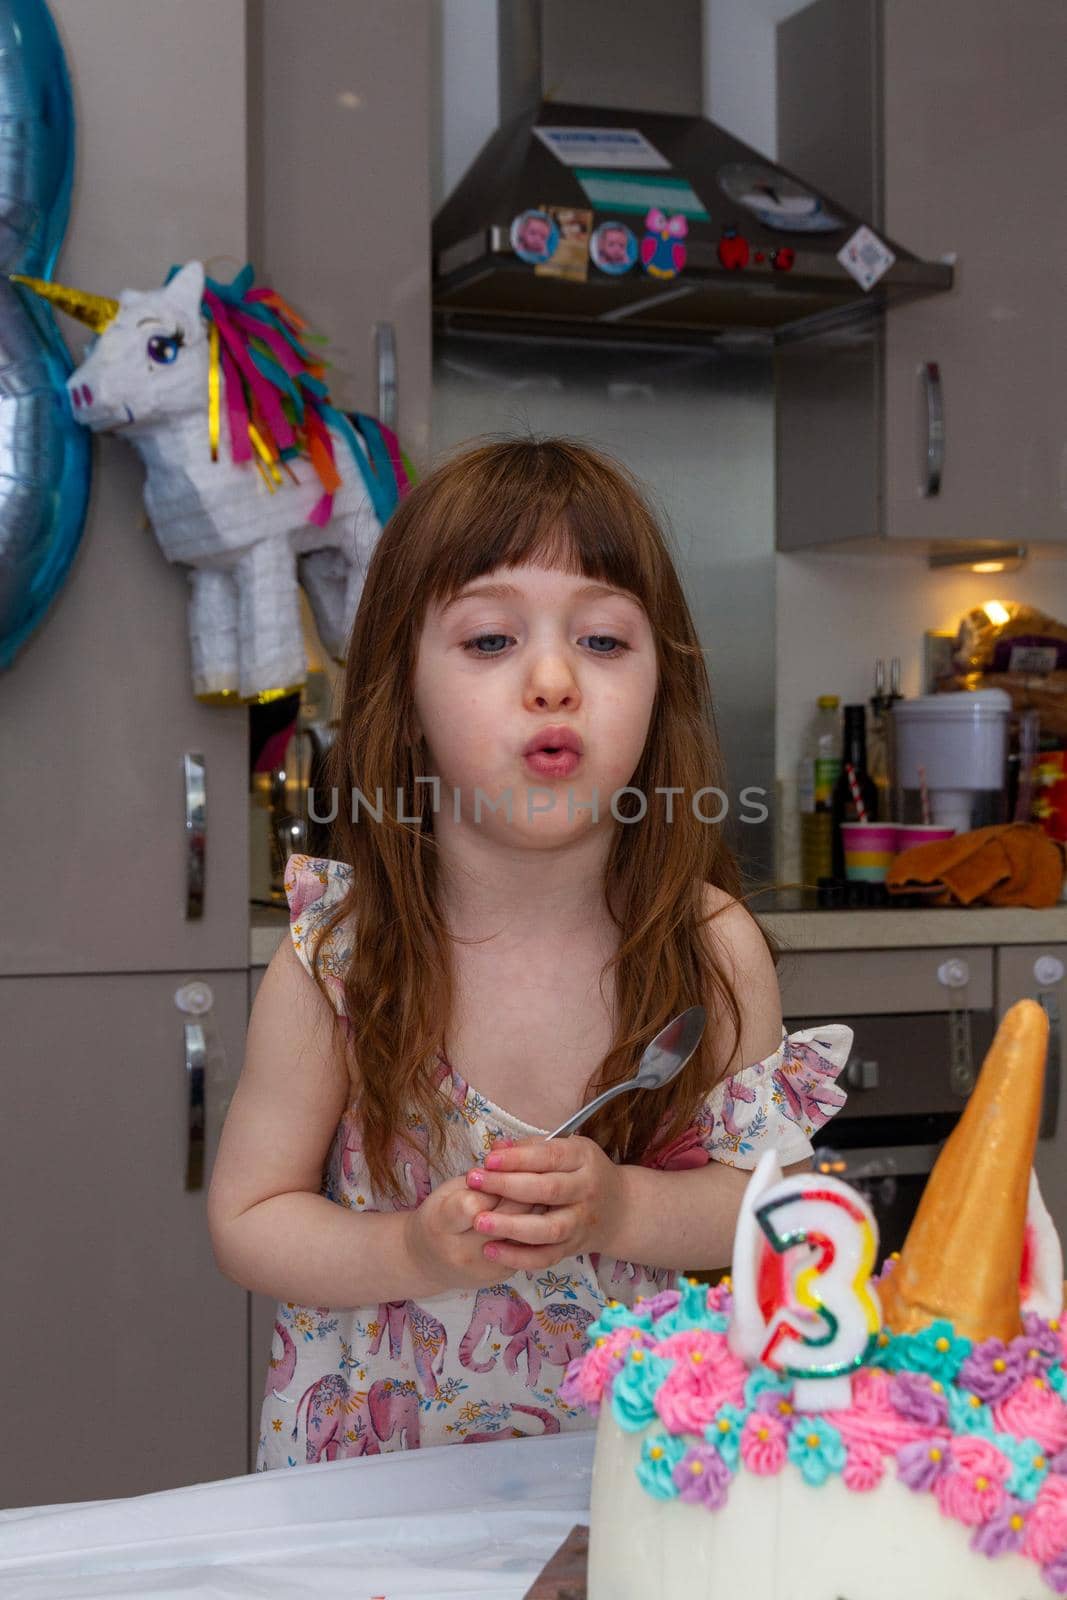 A Cute, brown-haired baby girl in a kitchen blowing candles of a birthday cake decorated as an unicorn with a number three candle with a pinhata in the background